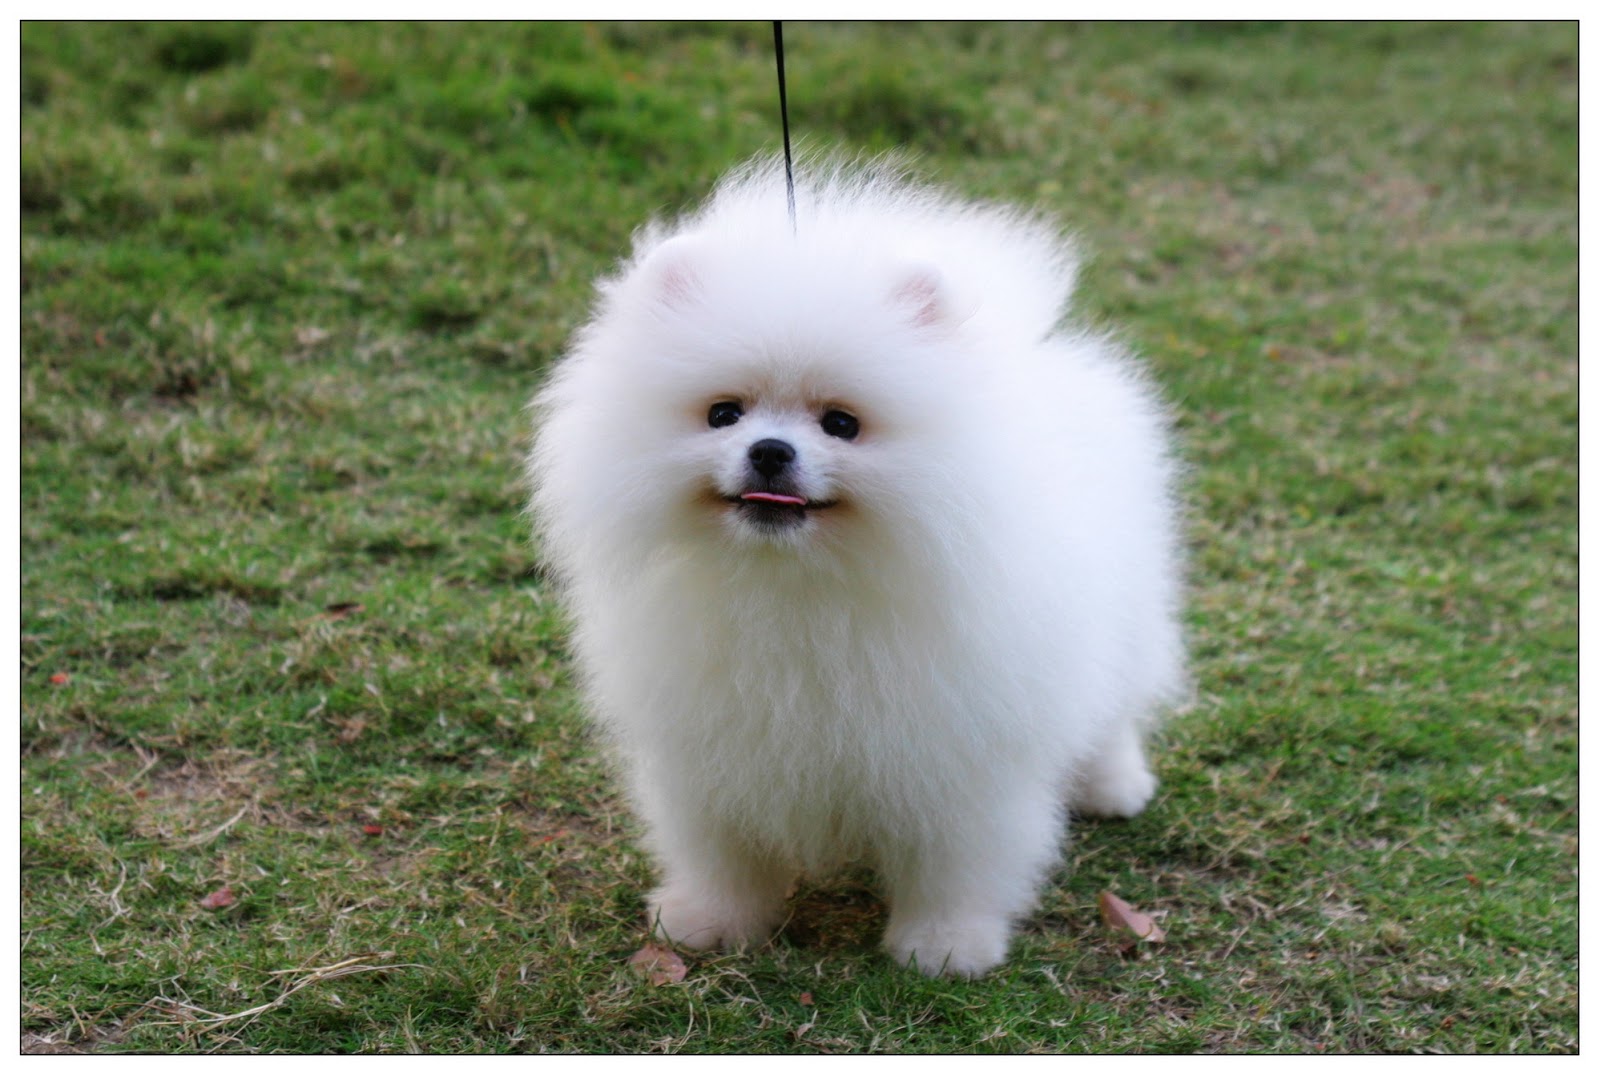 Cute Puppy Dogs: White Pomeranian Puppies